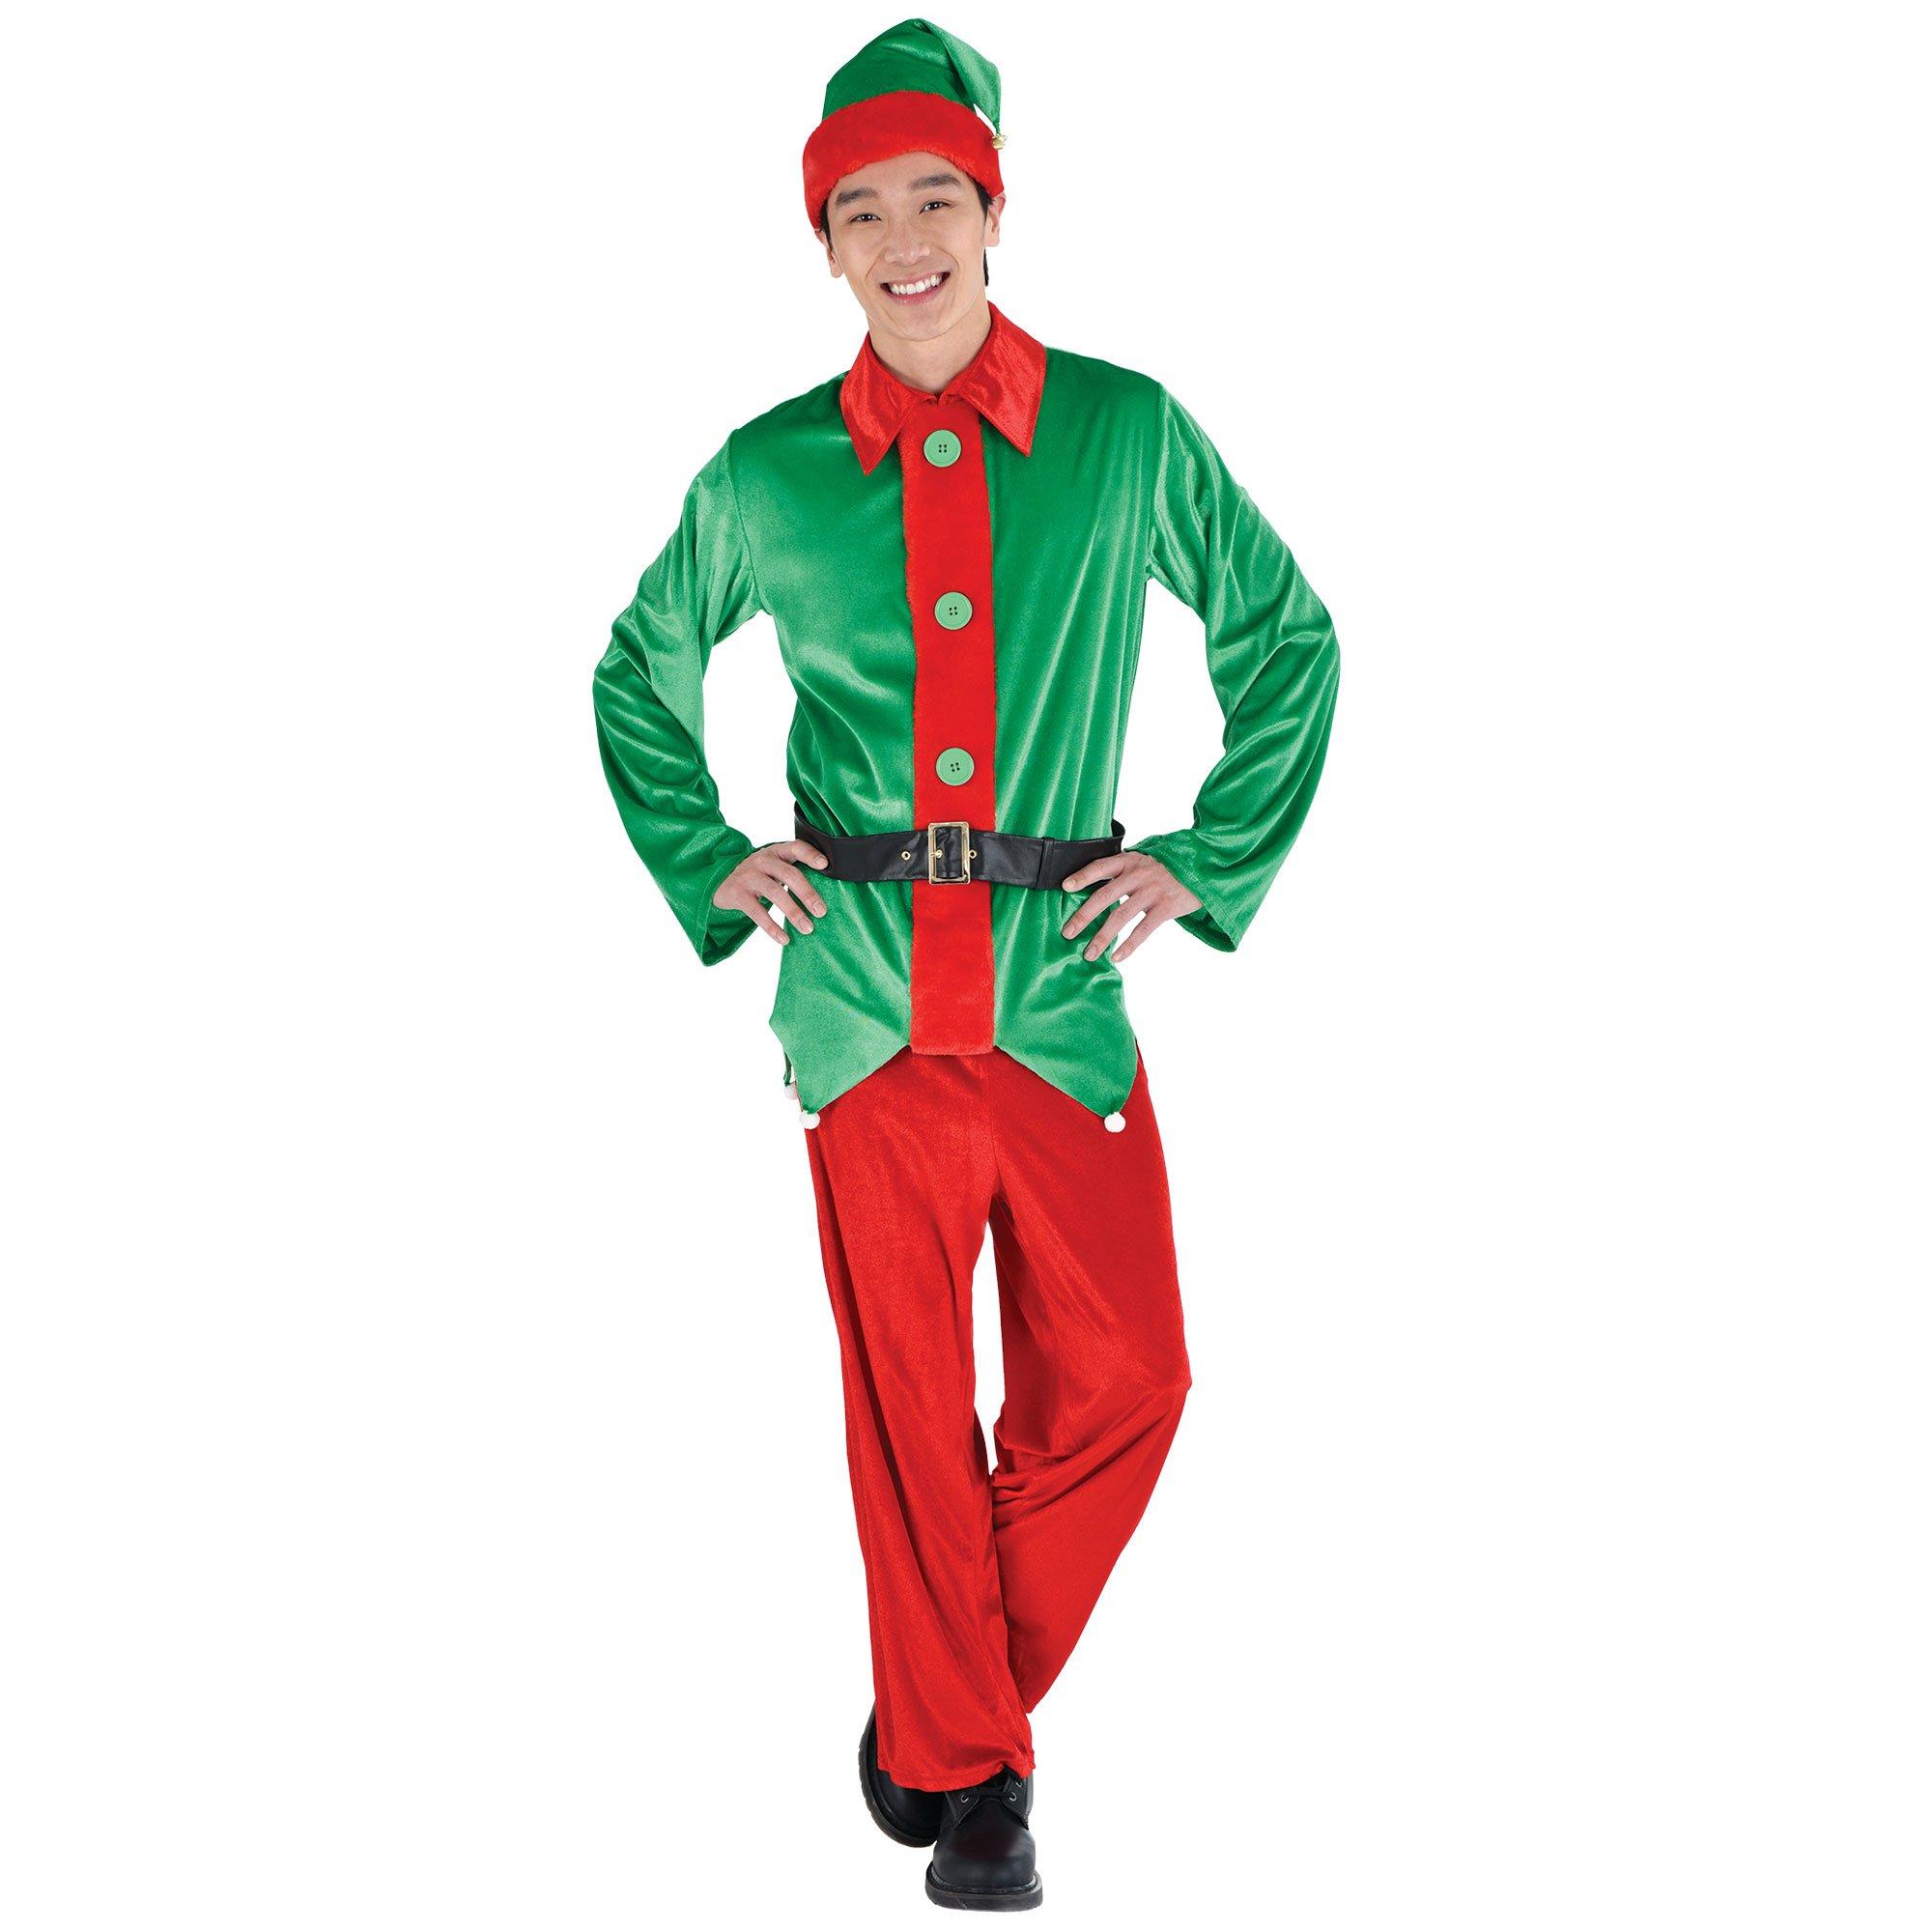 Adult Elf Costume | Party City